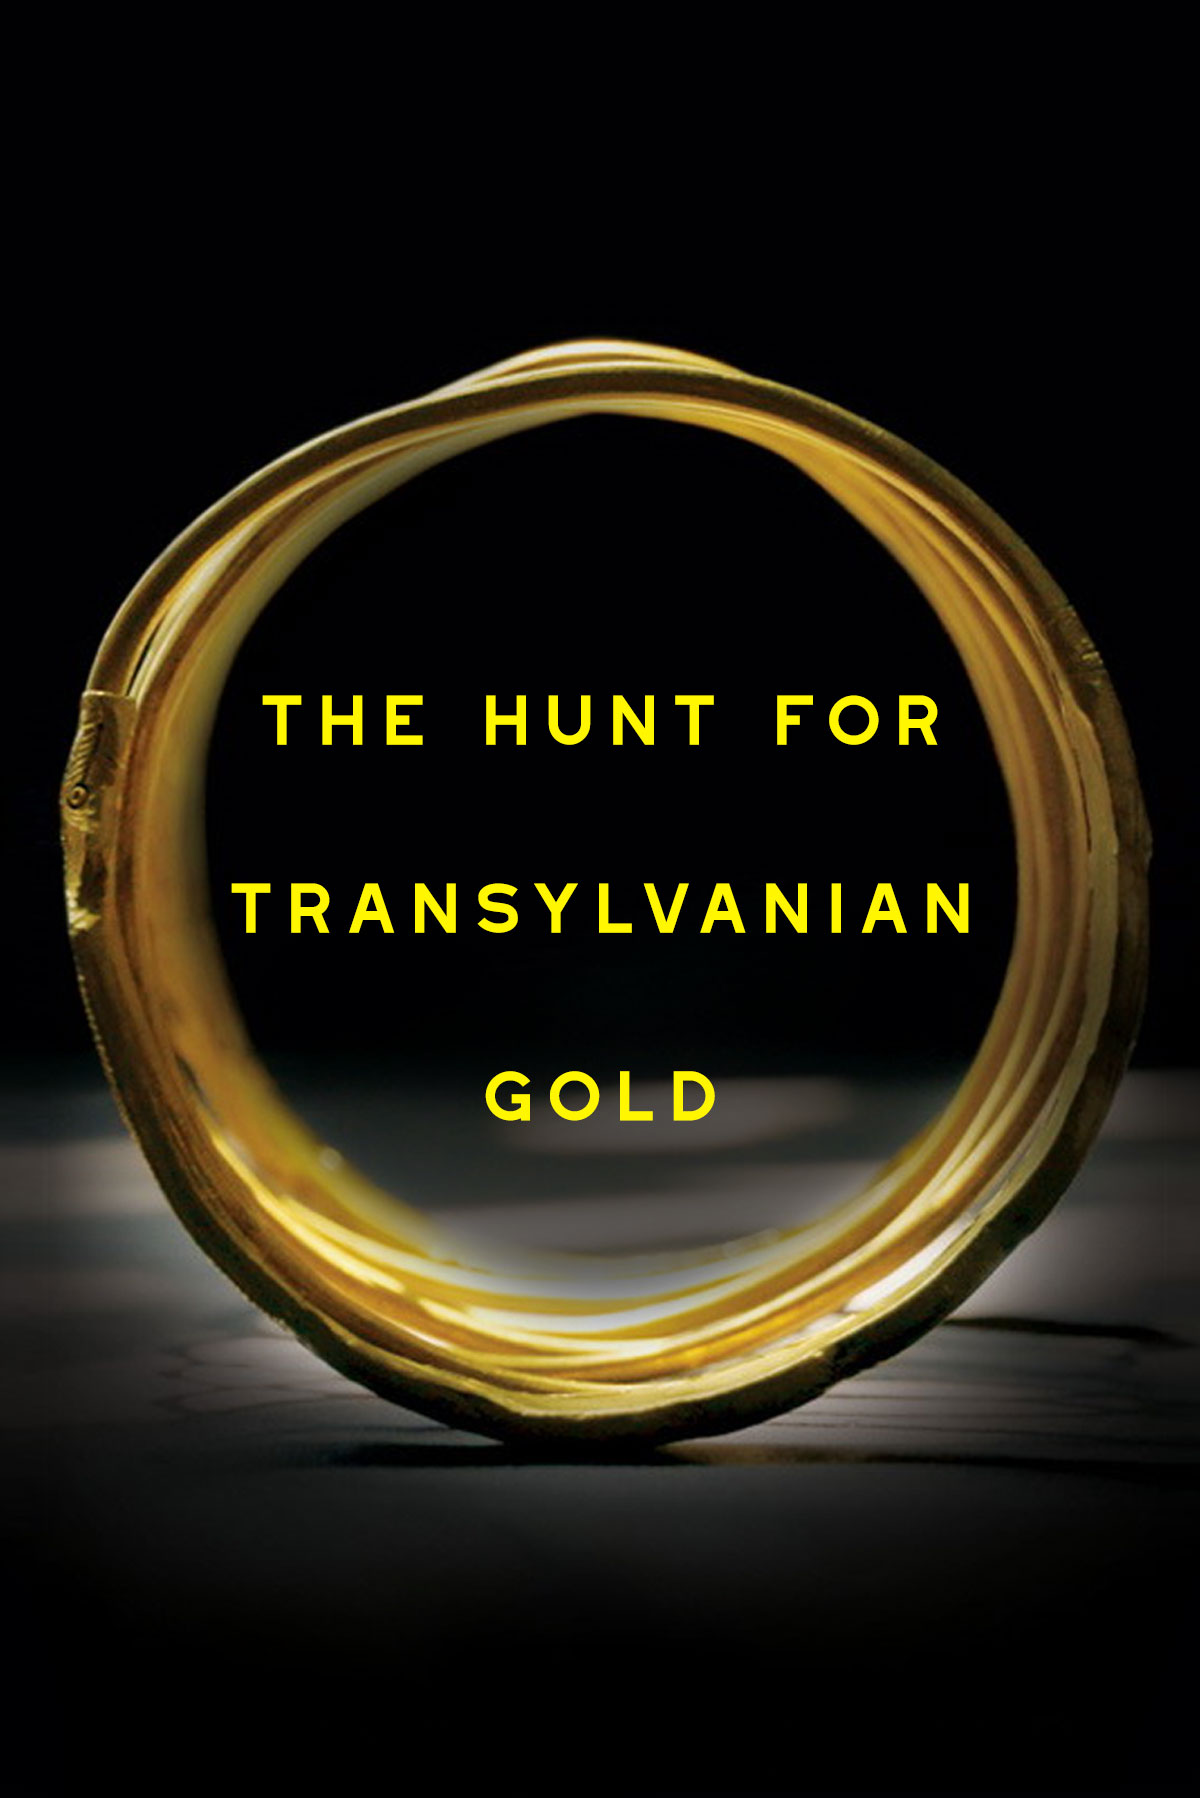 The Hunt For Transylvanian Gold